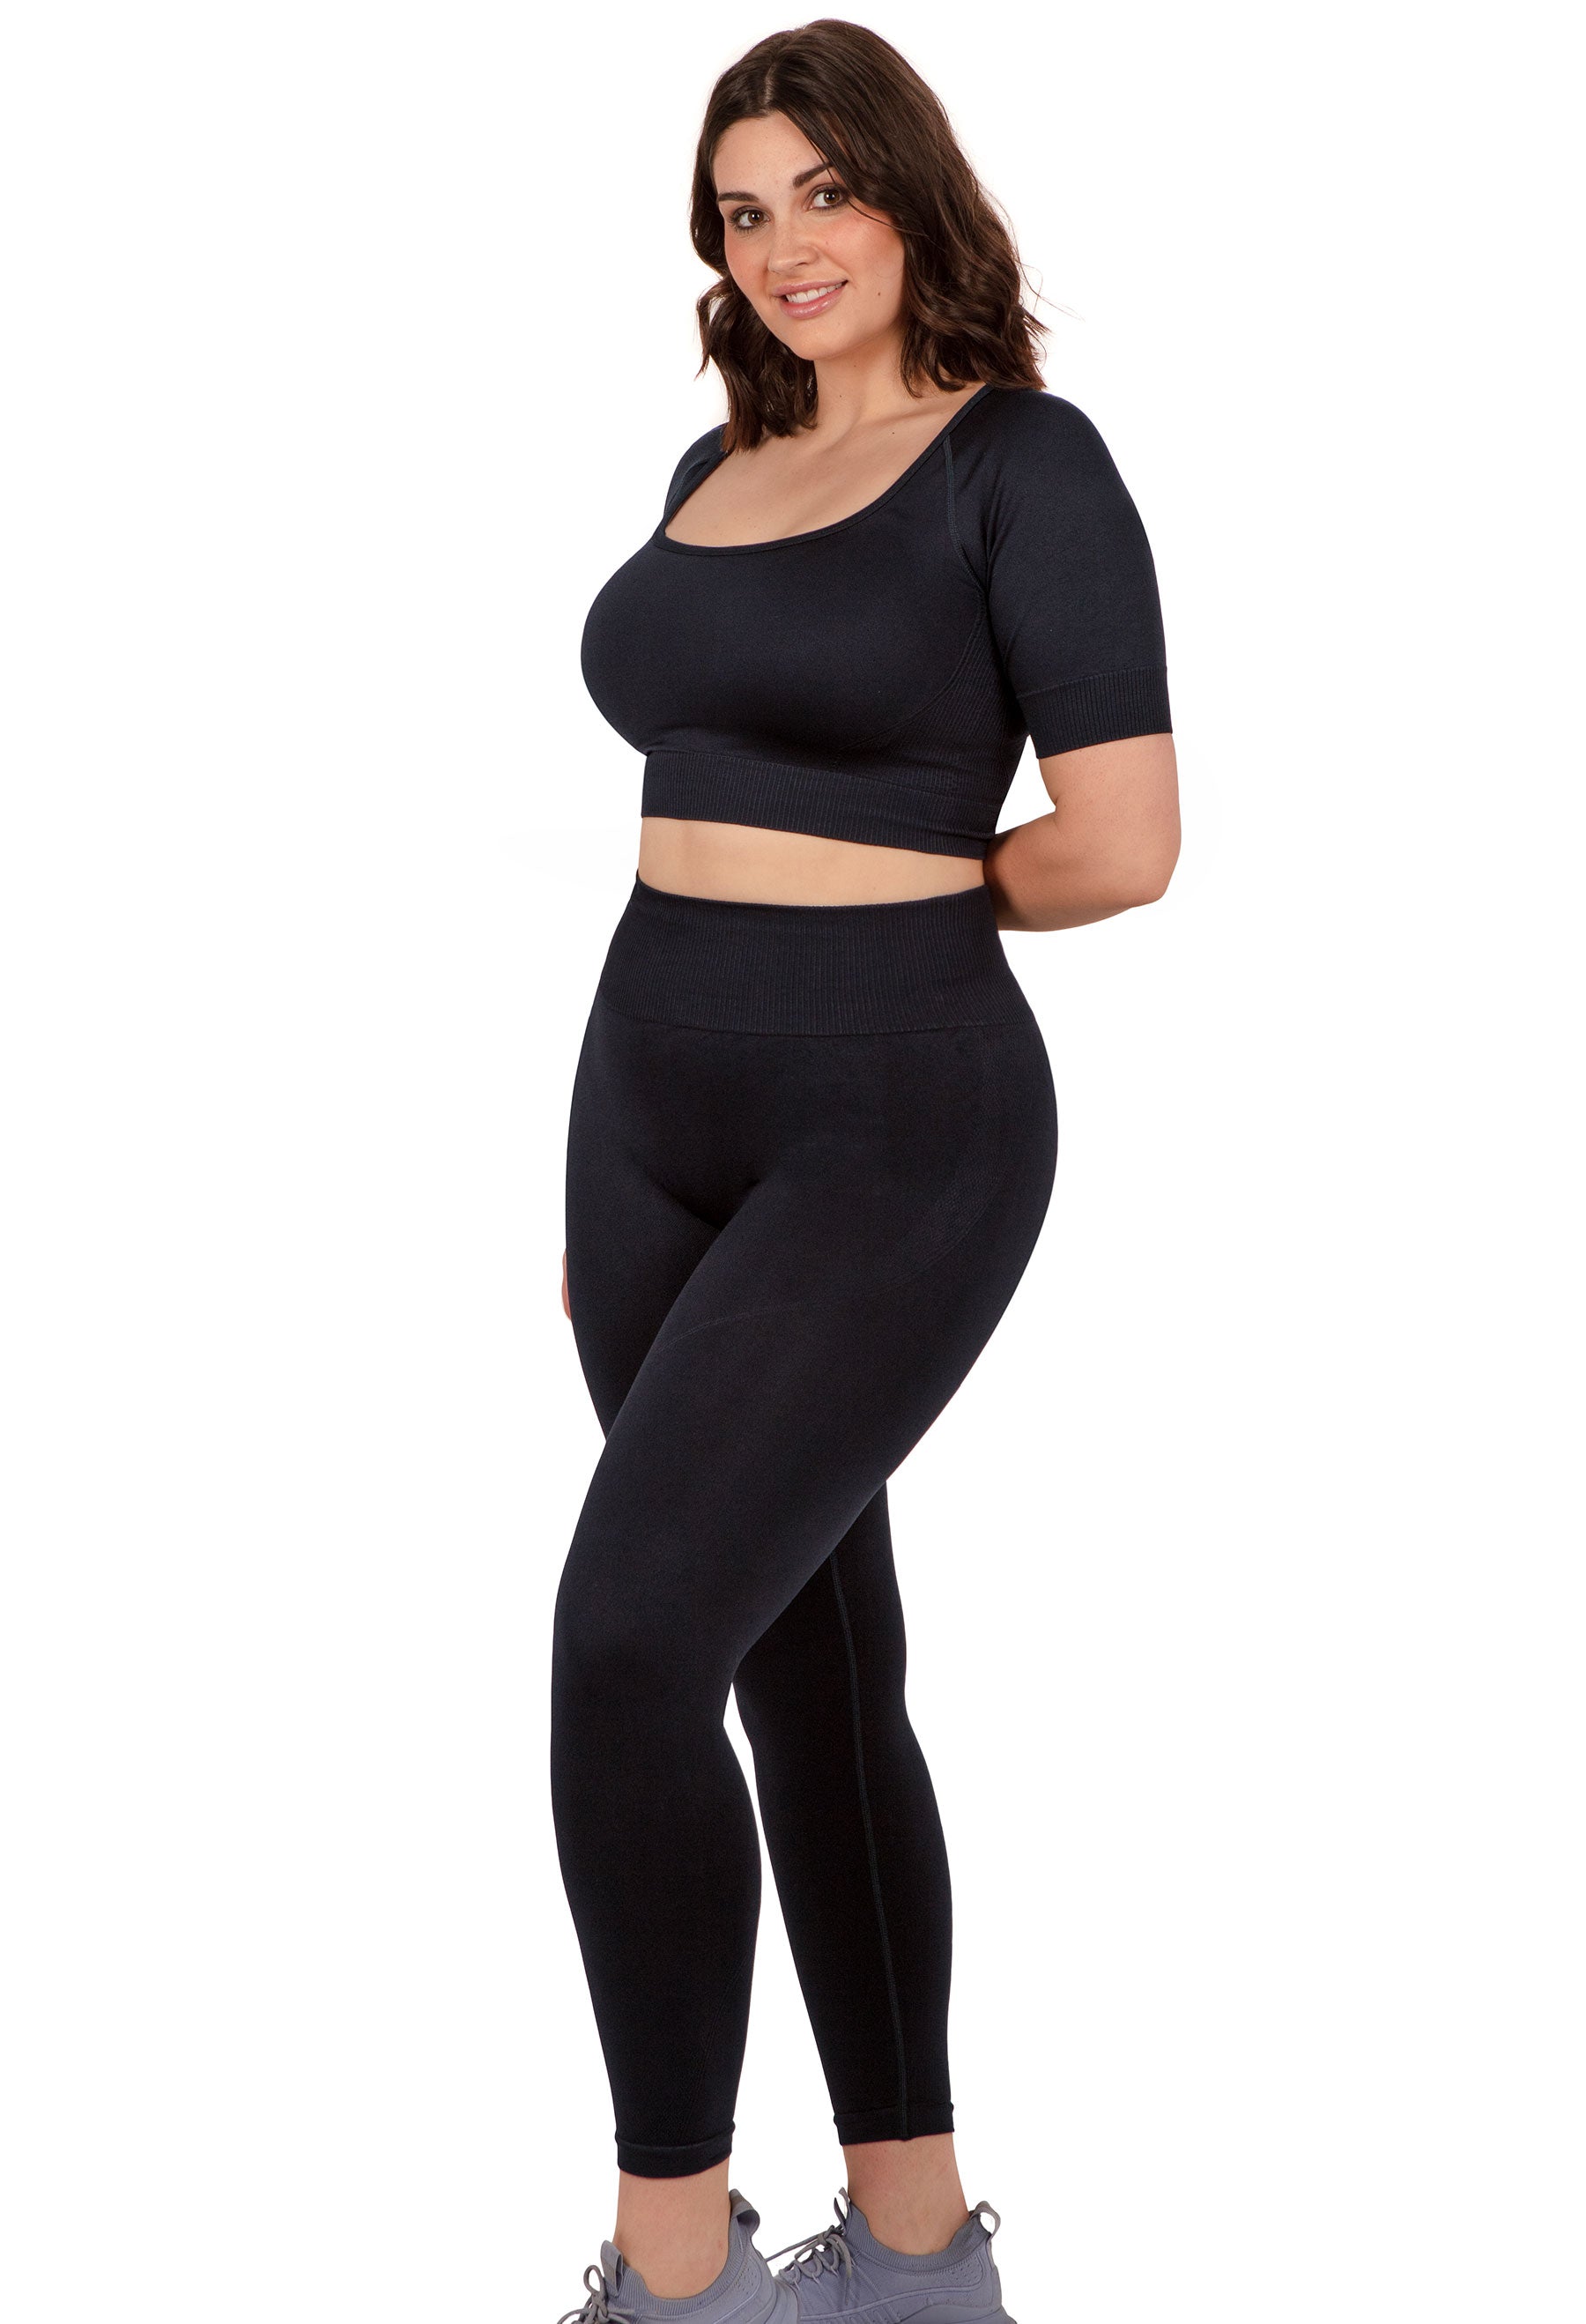 Seamless Collection, Women's Activewear & Yoga Clothing AU